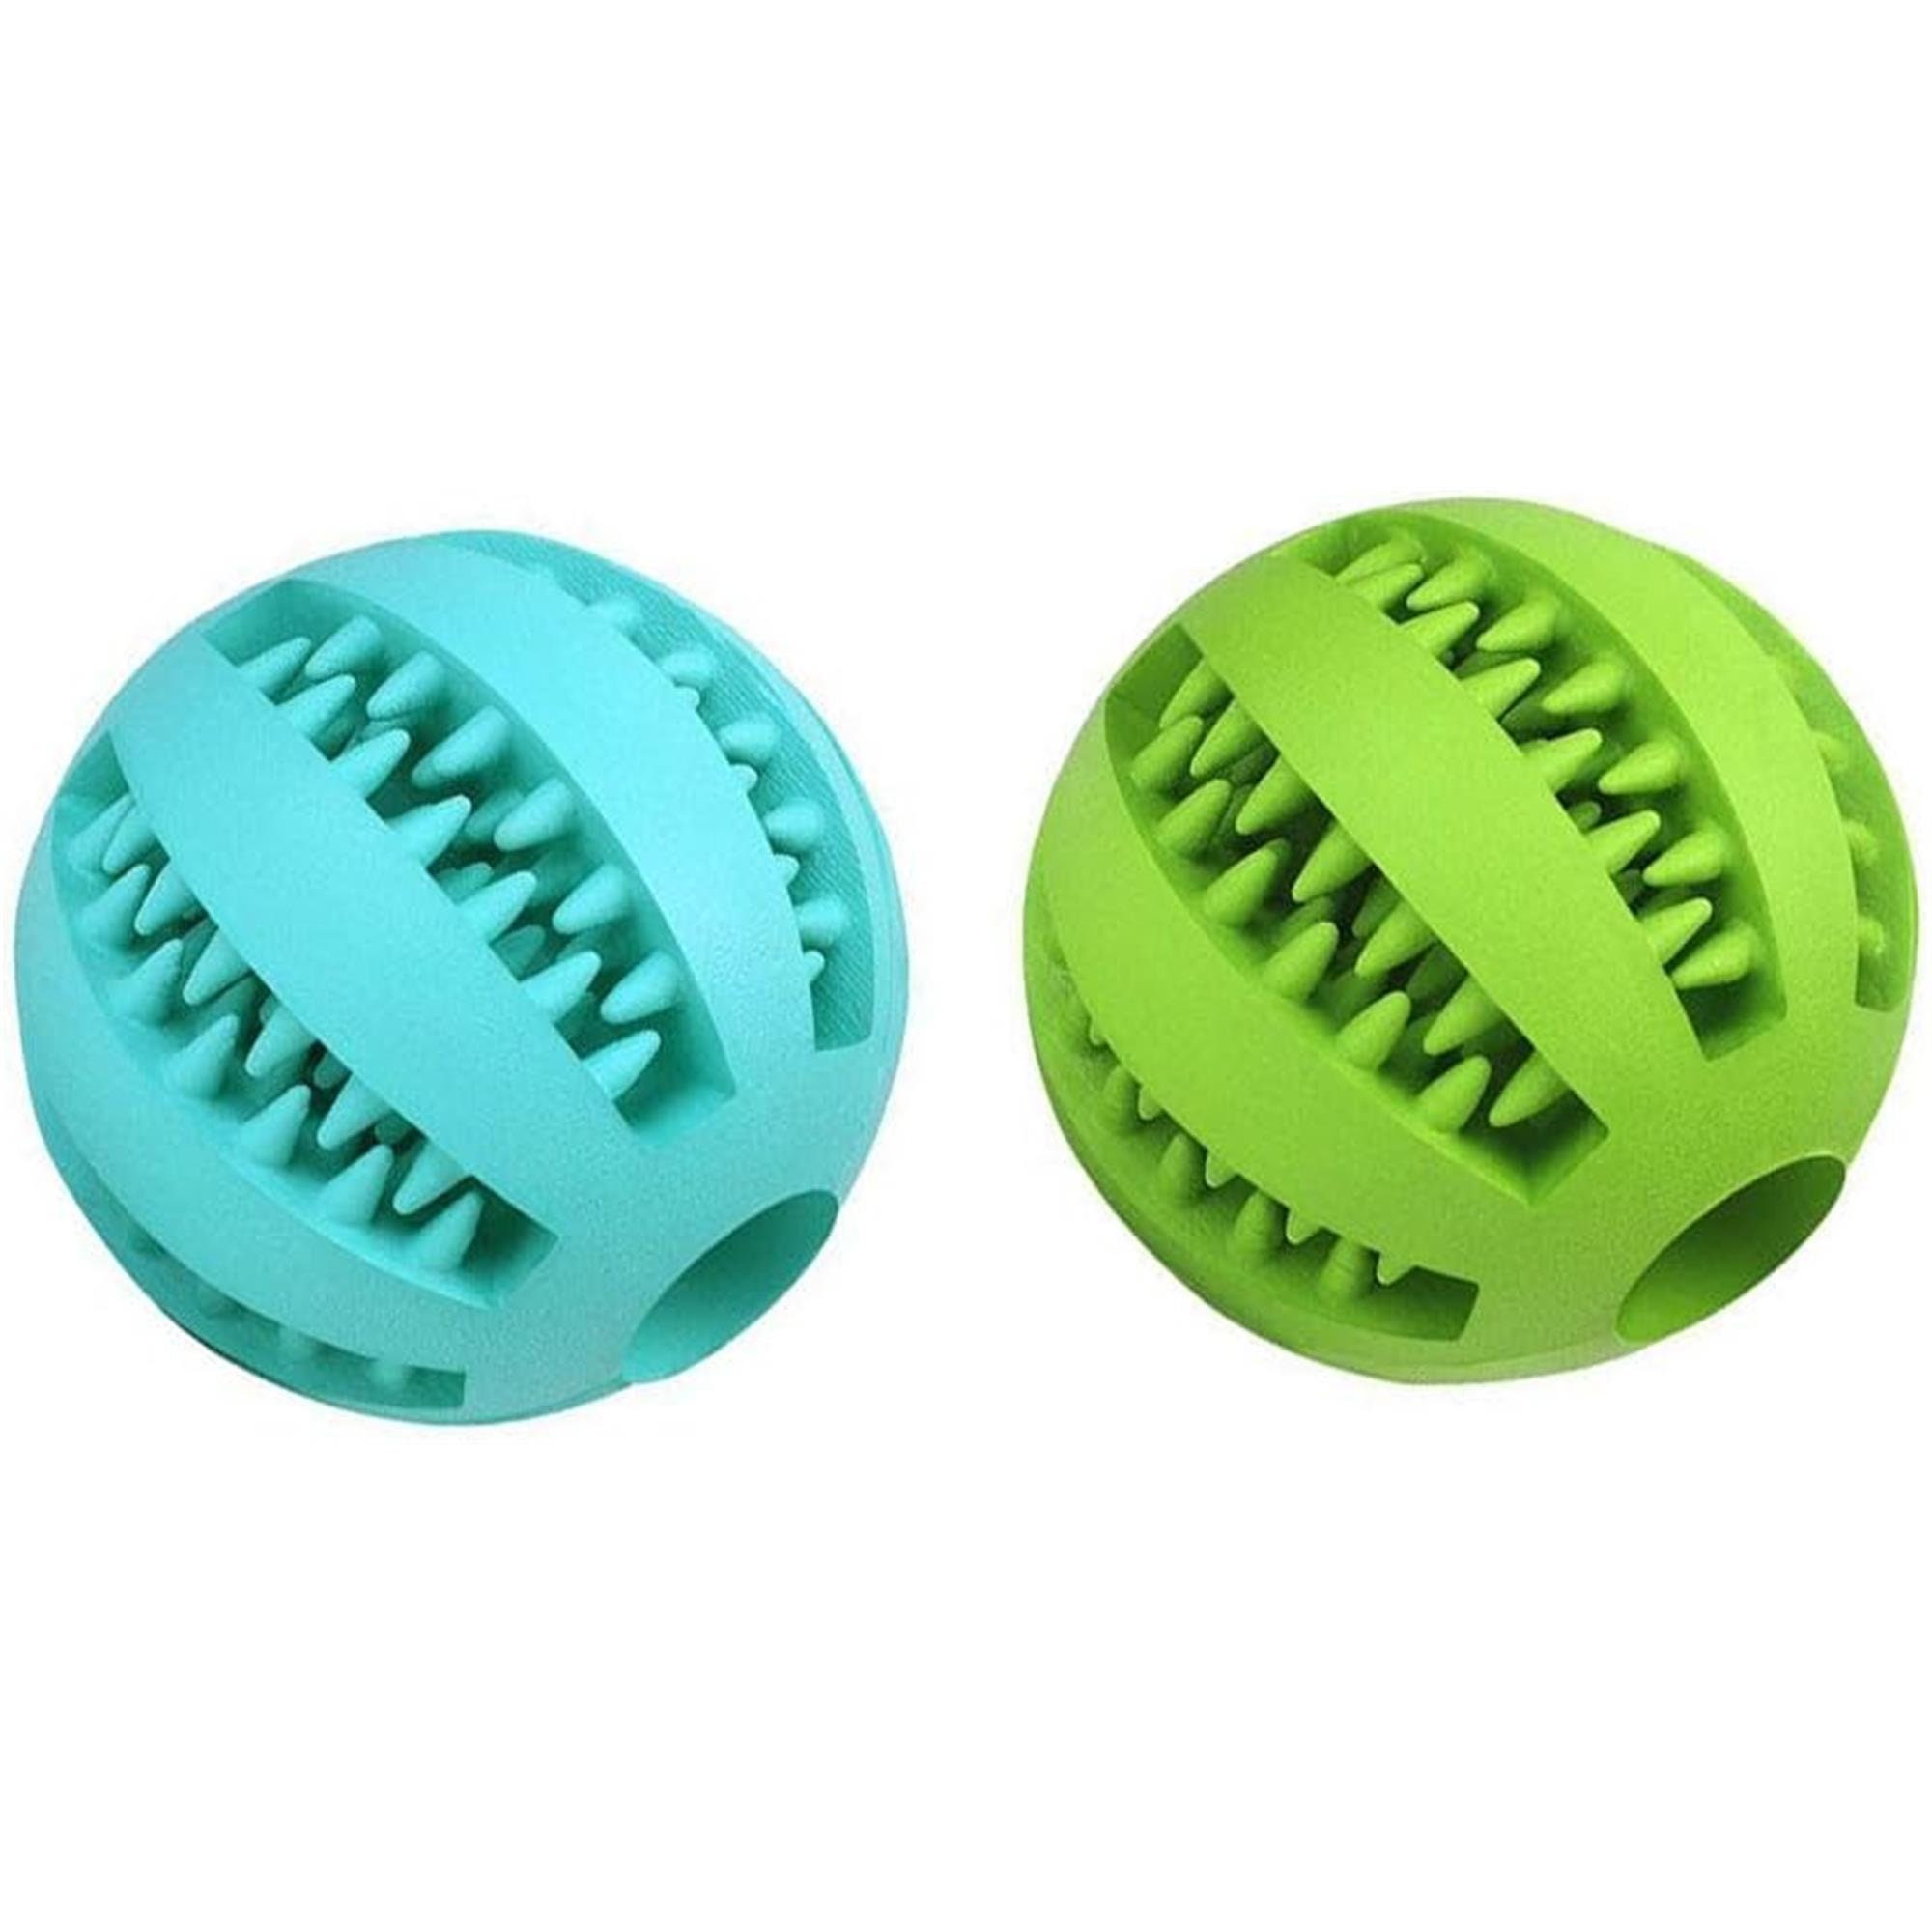 Puppy Teething Chew Toy Balls: 2pack Interactive Dog Treat Dispensing Ball  Rubber Small Breed Dog Chewing Enrichment Toys for Boredom and Brain